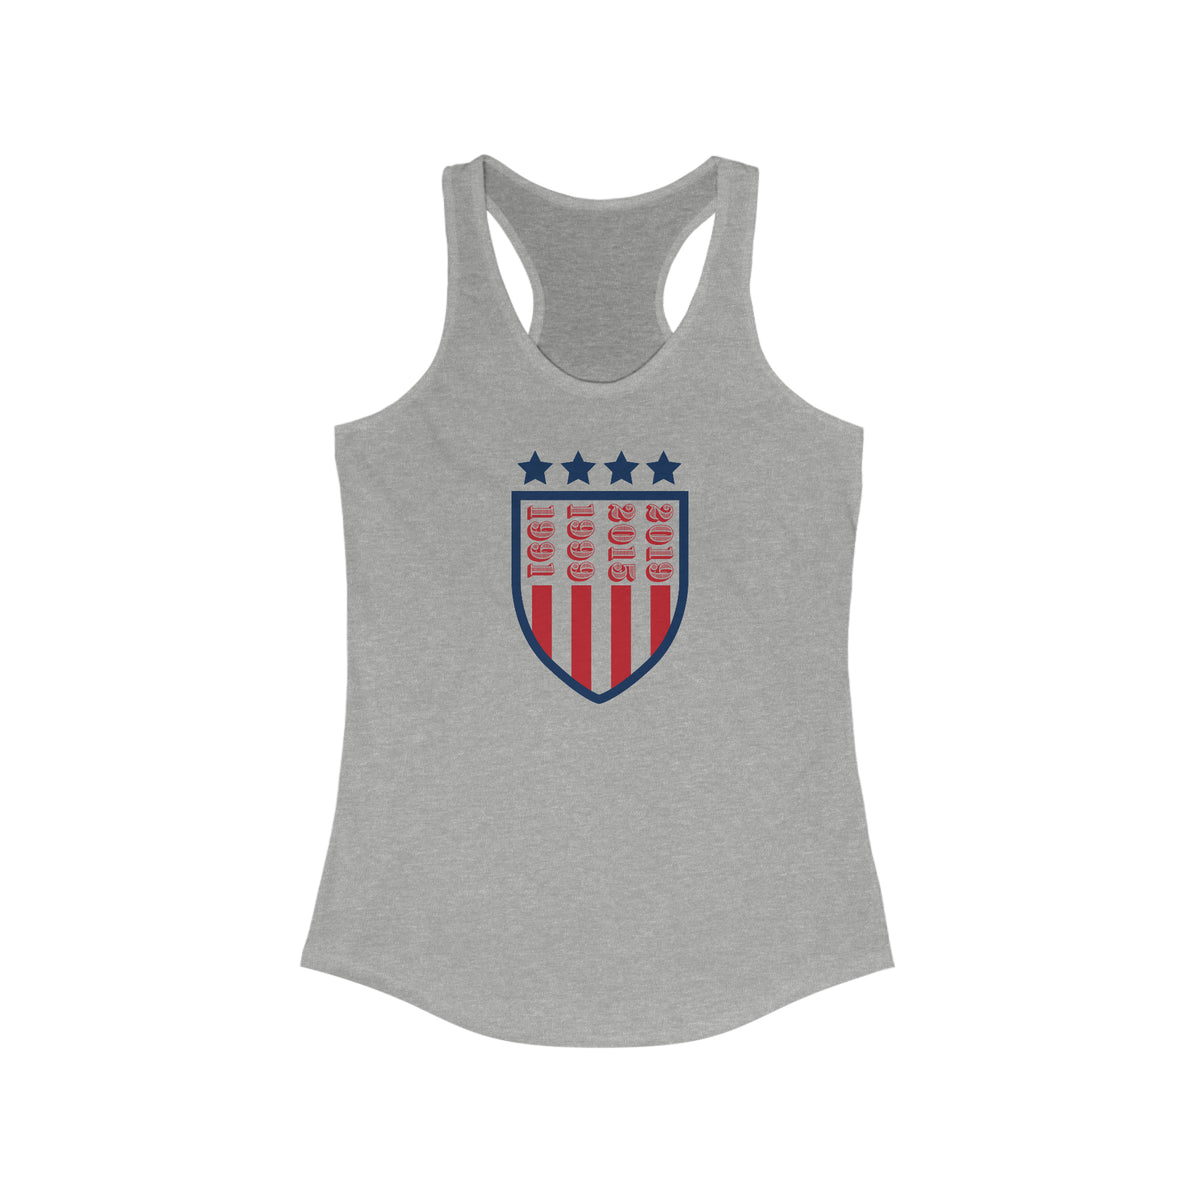 USWNT Champs Crest Womens Racerback Tank